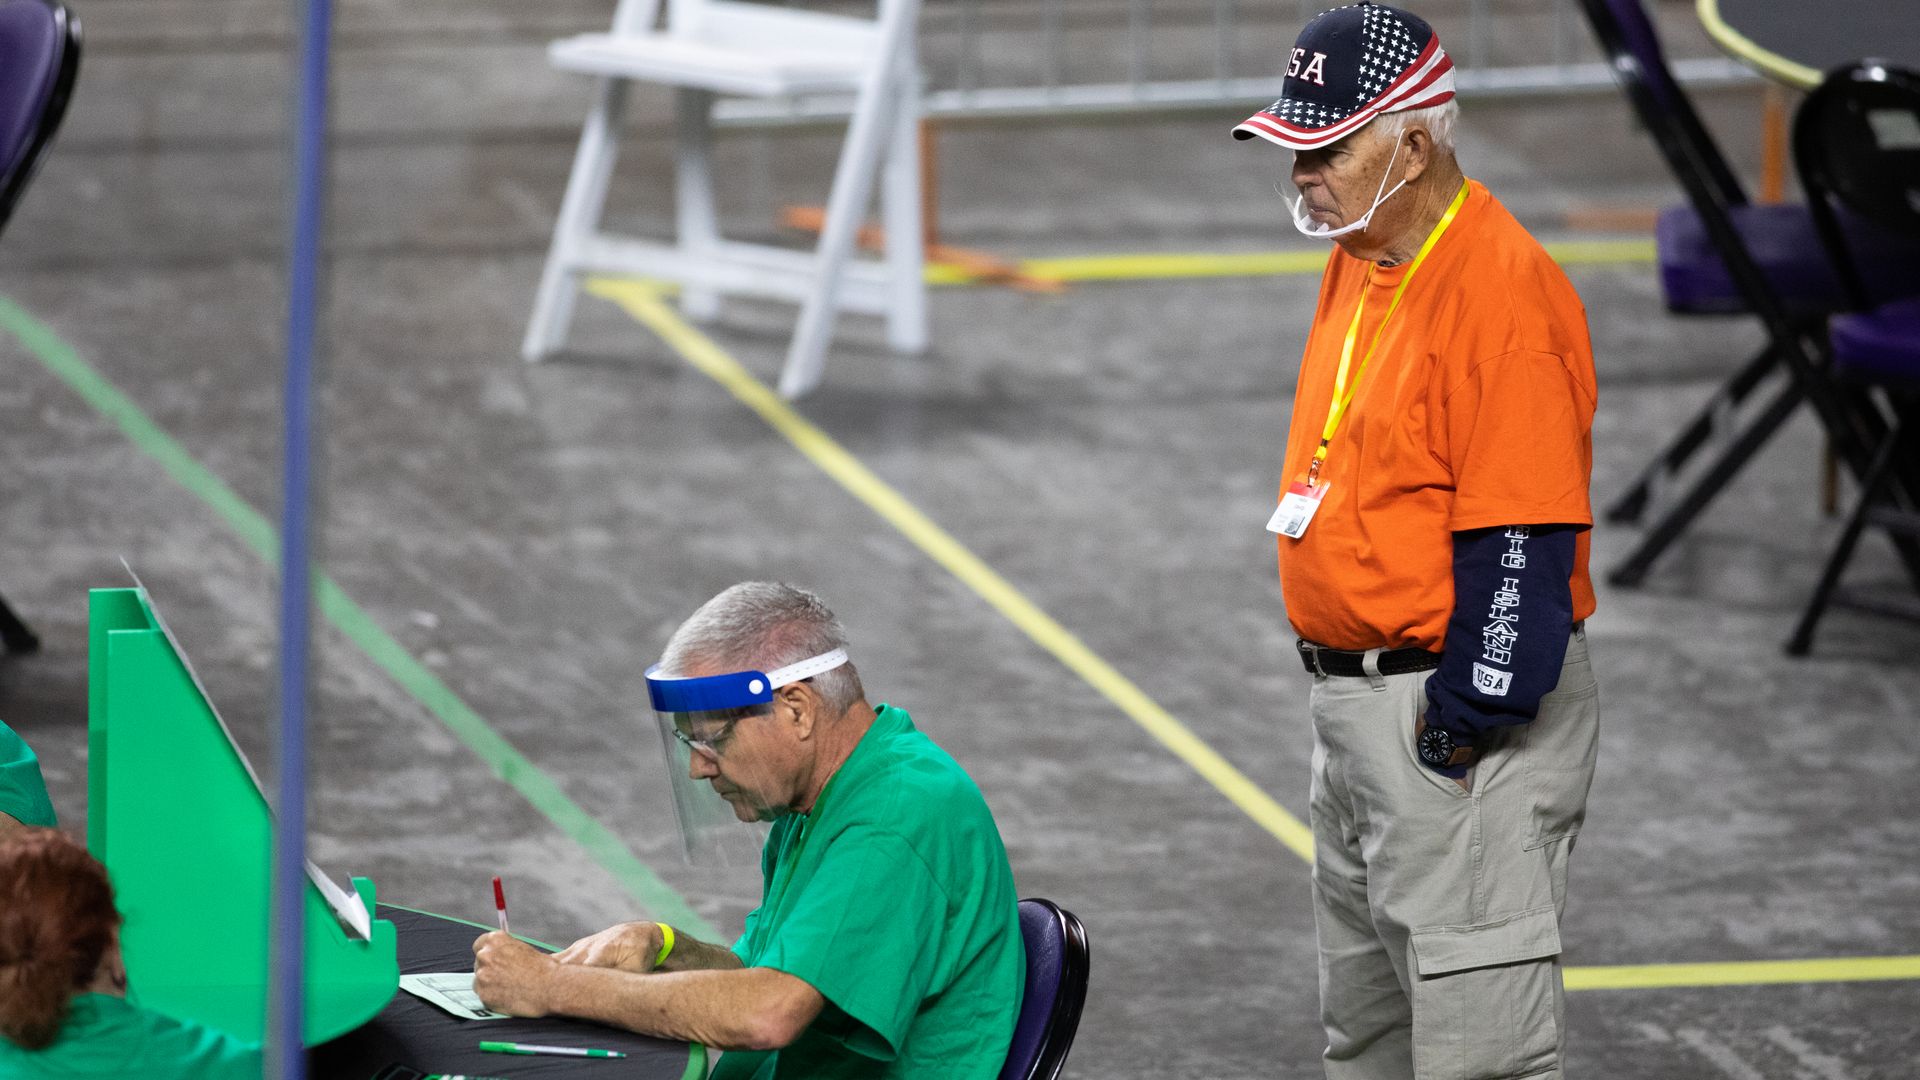 An observer watches as contractors working for Cyber Ninjas, who was hired by the Arizona State Senate, examine and recount ballots from the 2020 general election at Veterans Memorial Coliseum